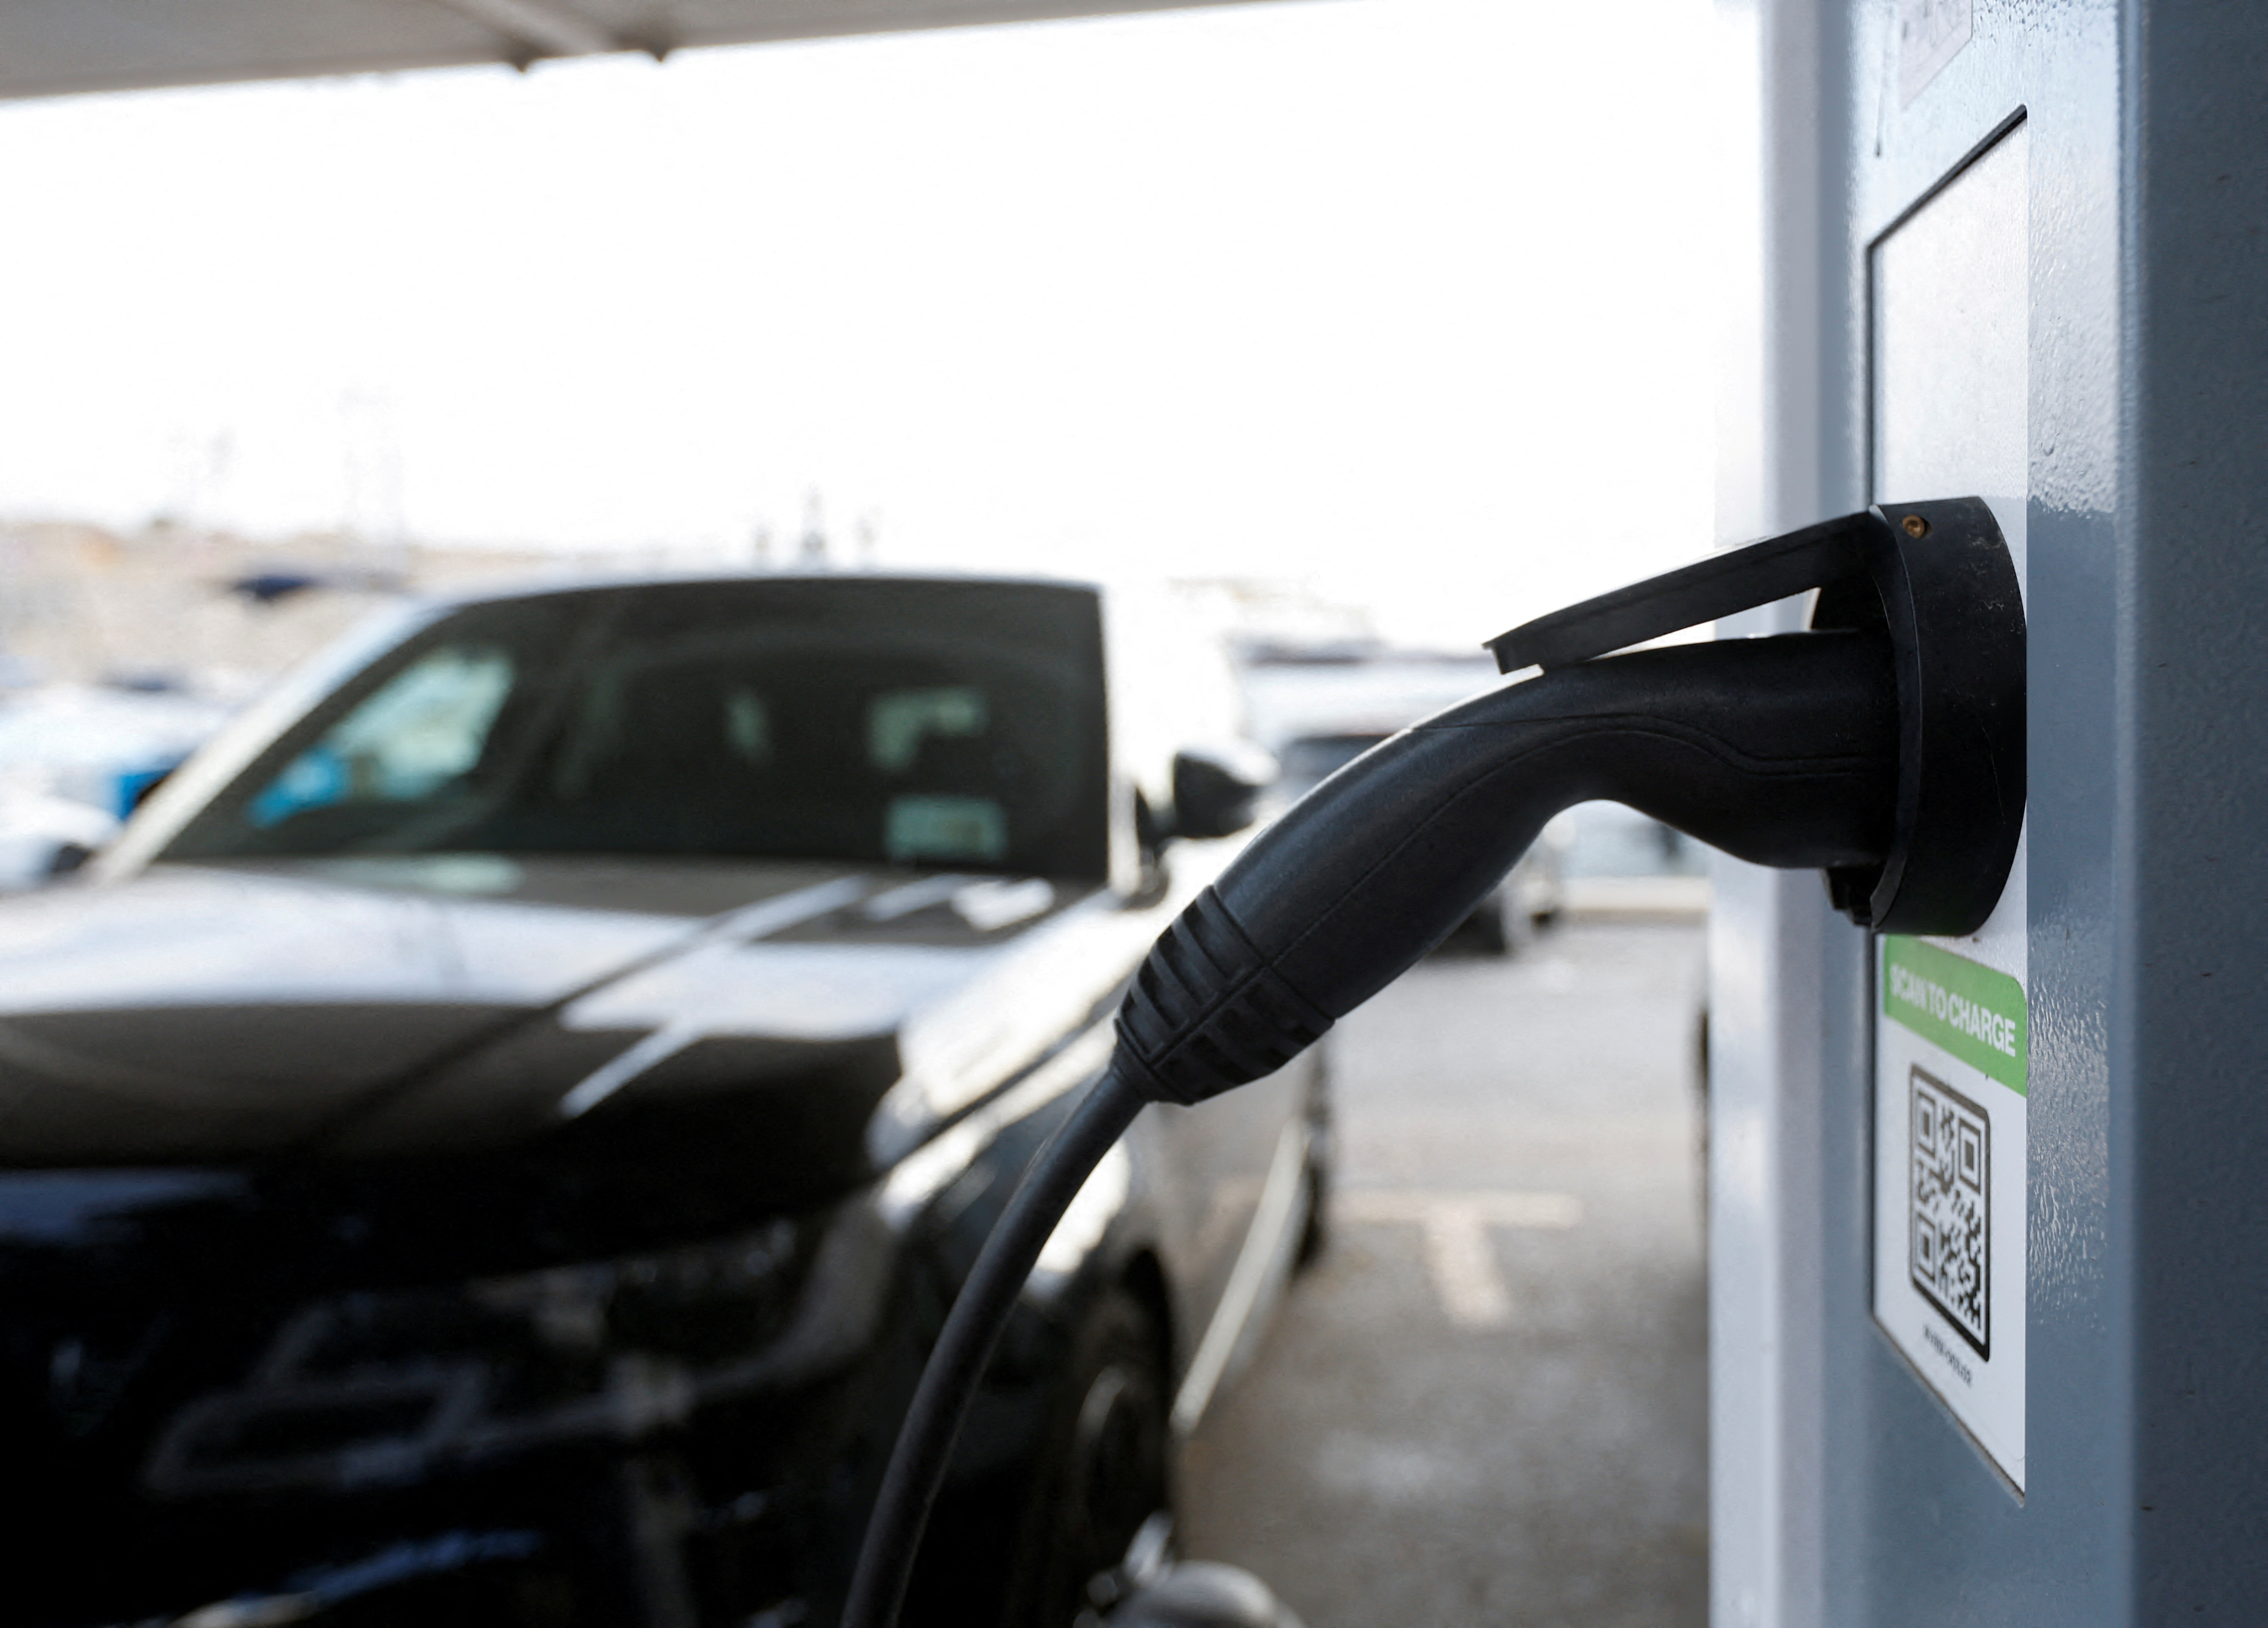 EV charger station firms battle for prime locations in Europe, US